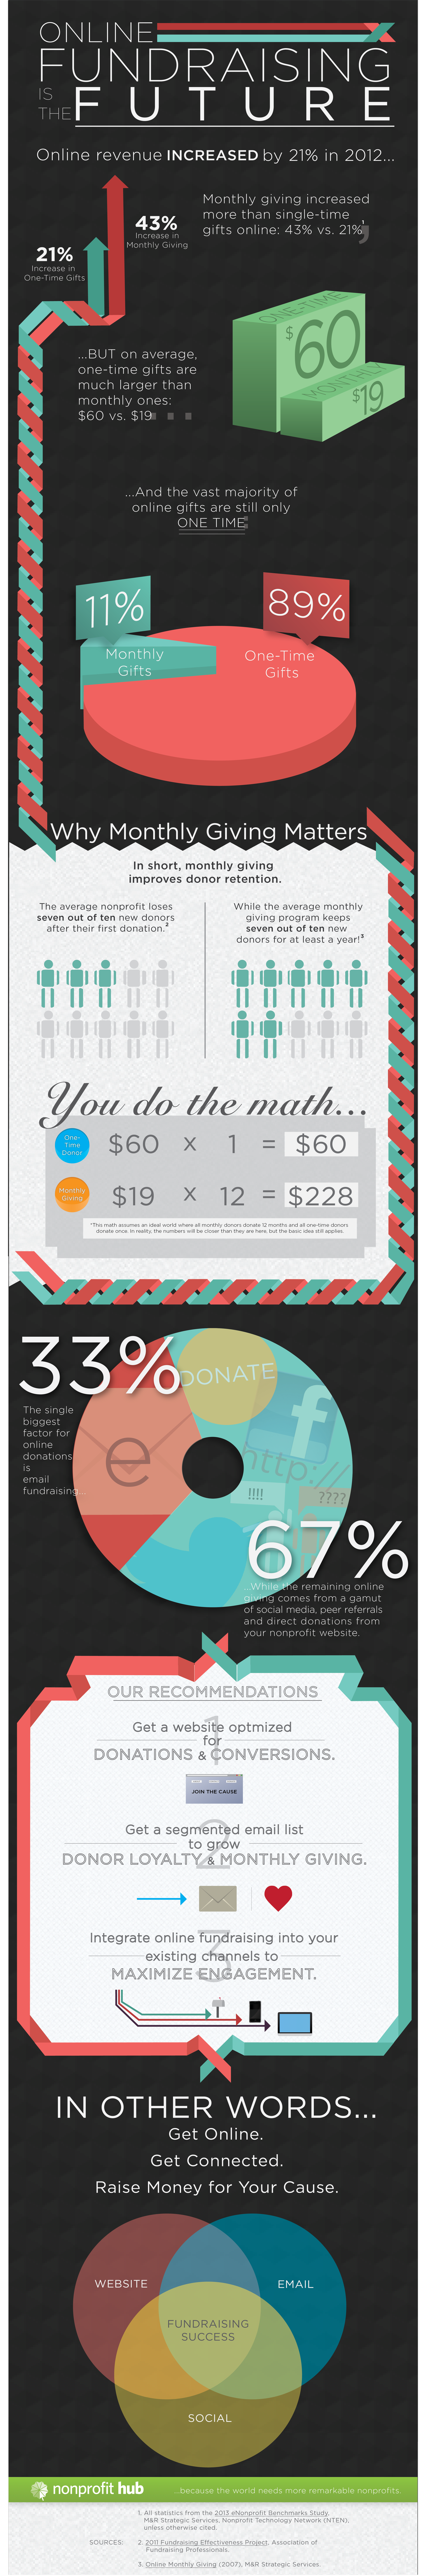 The Power of Online Fundraising INFOGRAPHIC